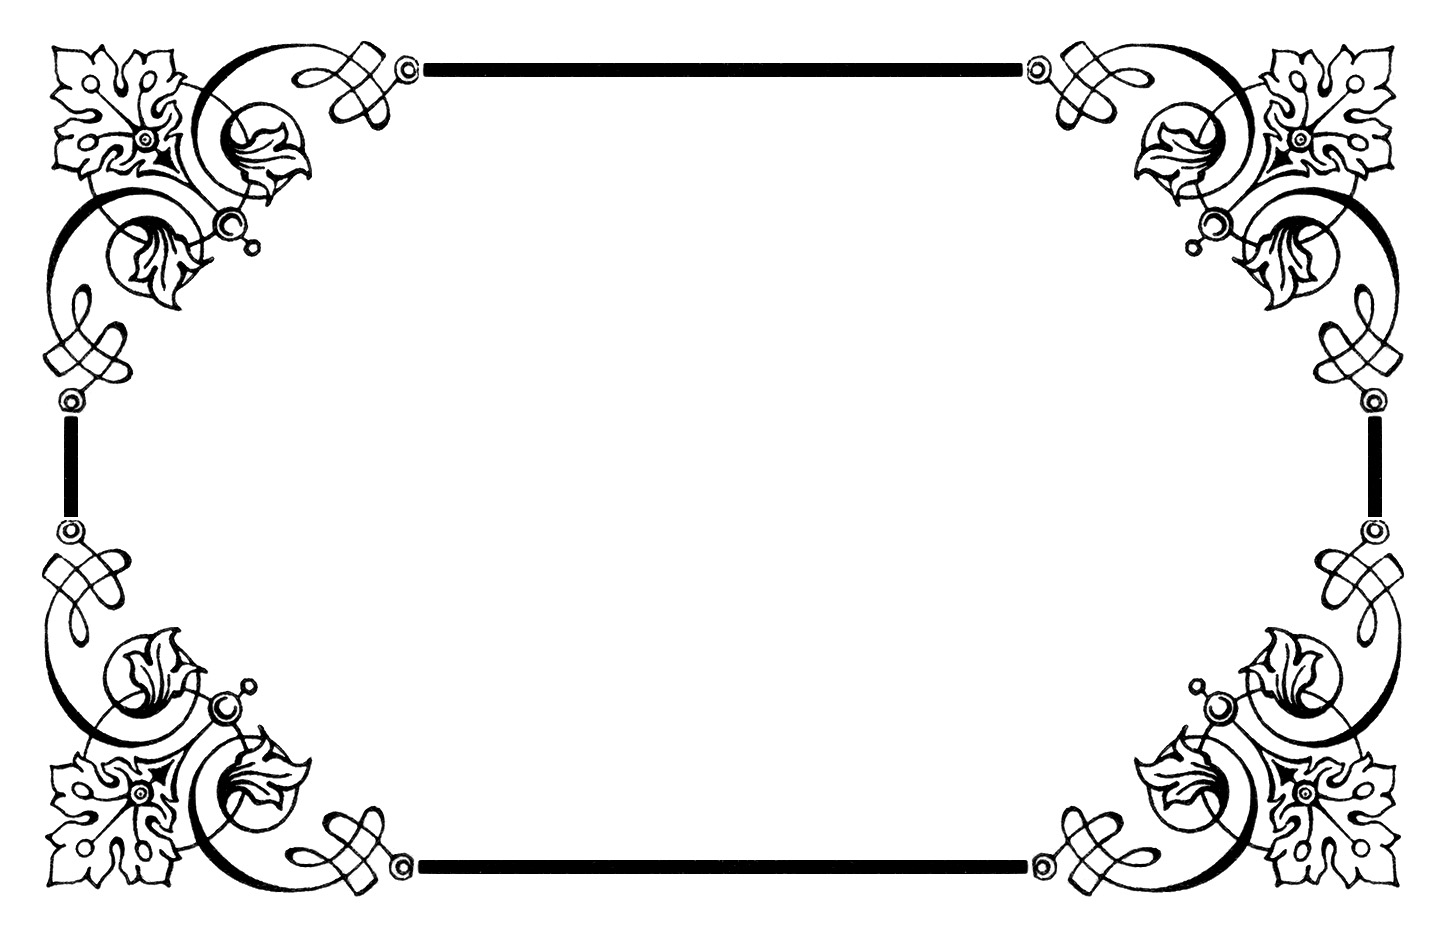 free library clipart borders - photo #24